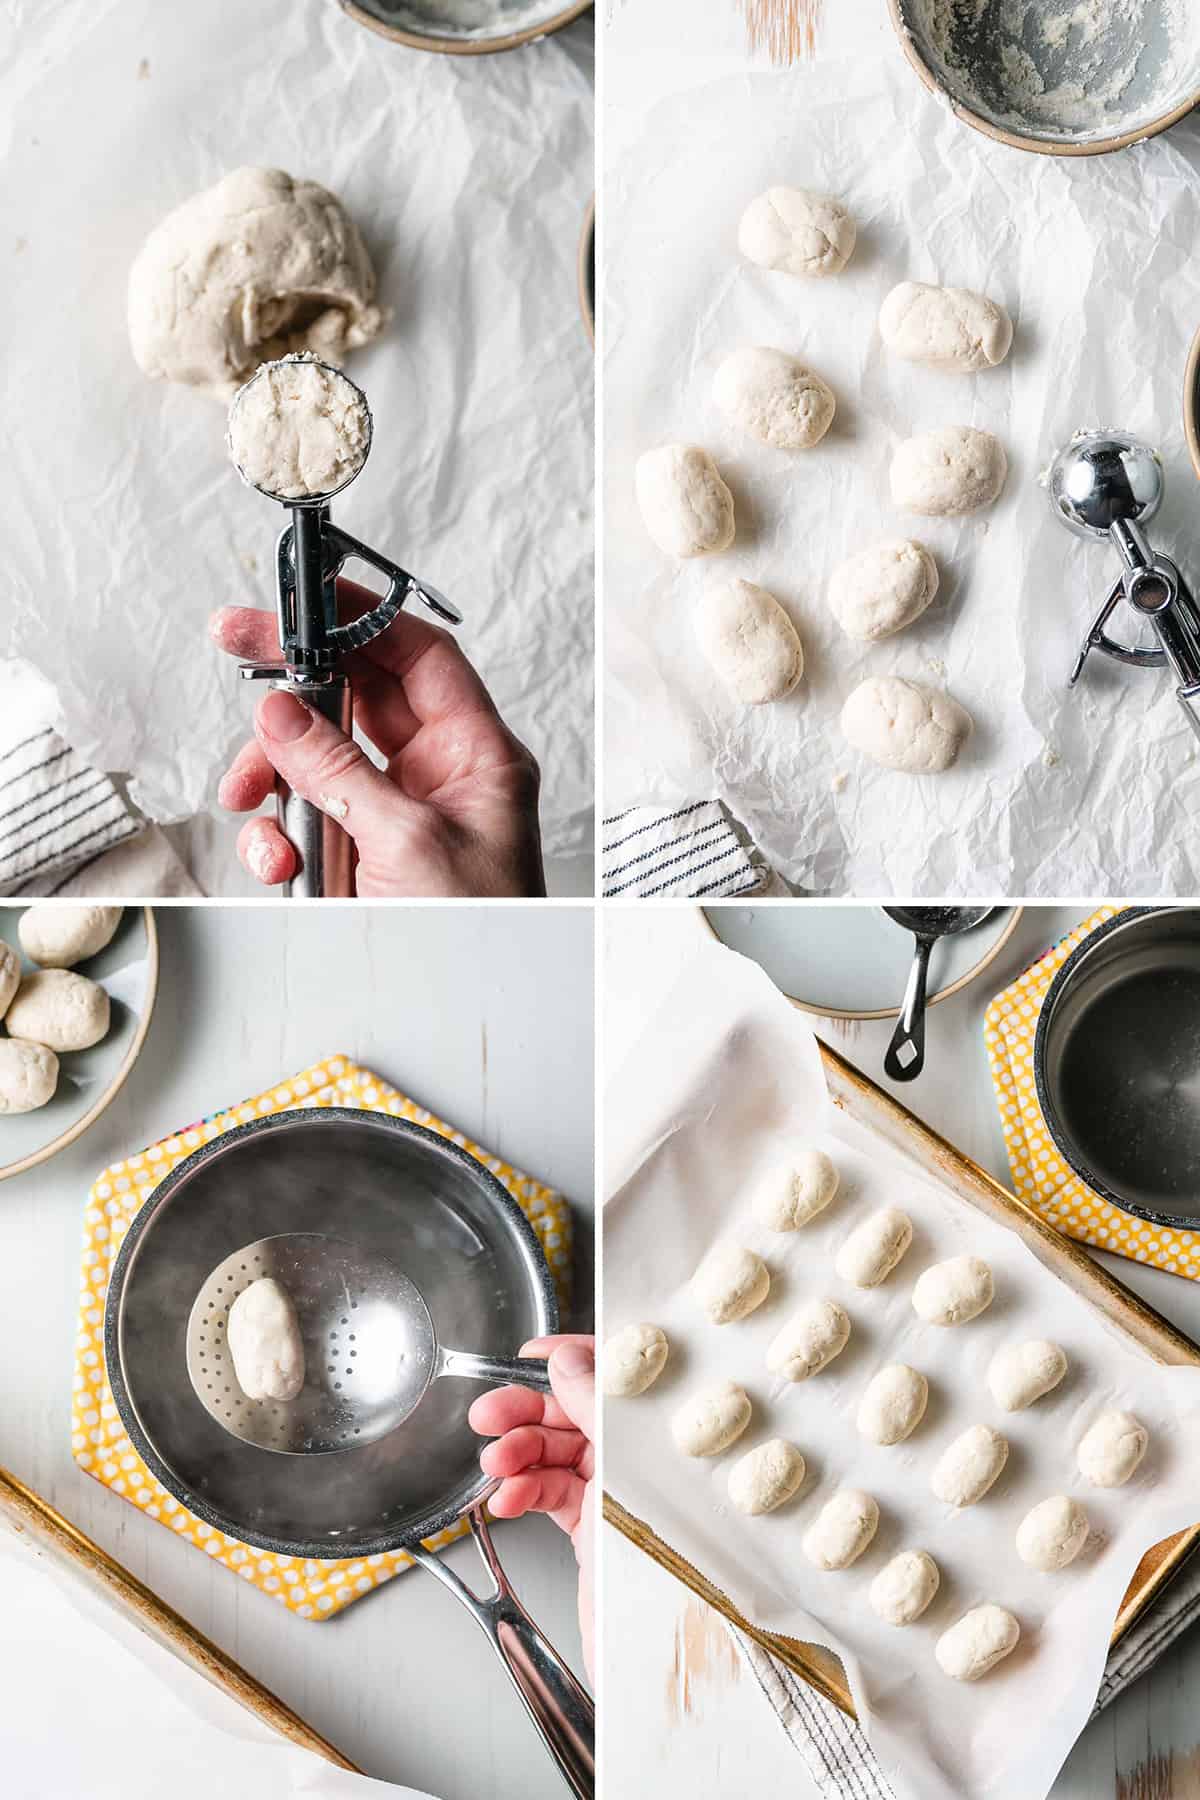 Dough scooped with a cookie scoop is shaped into a nugget, then dipped in baking soda water, and laid on parchment lined baking sheet.